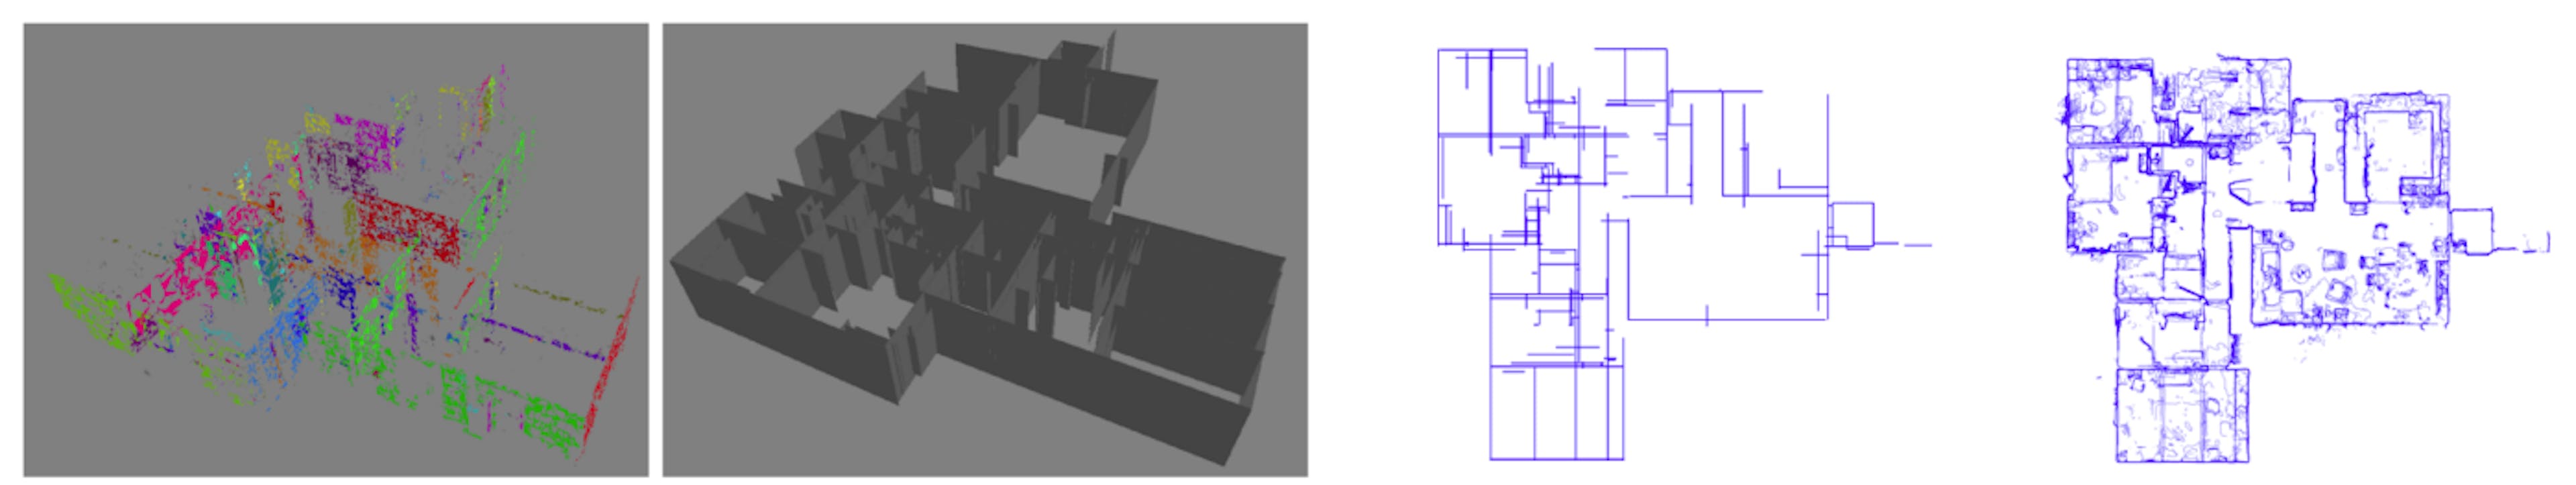 Fig. 14. First: DBSCAN clustering results for B2. Second: plane-fitted flat walls. Third: drafting-style floor plan. Fourth: (c) pen-and-ink style floor plan.